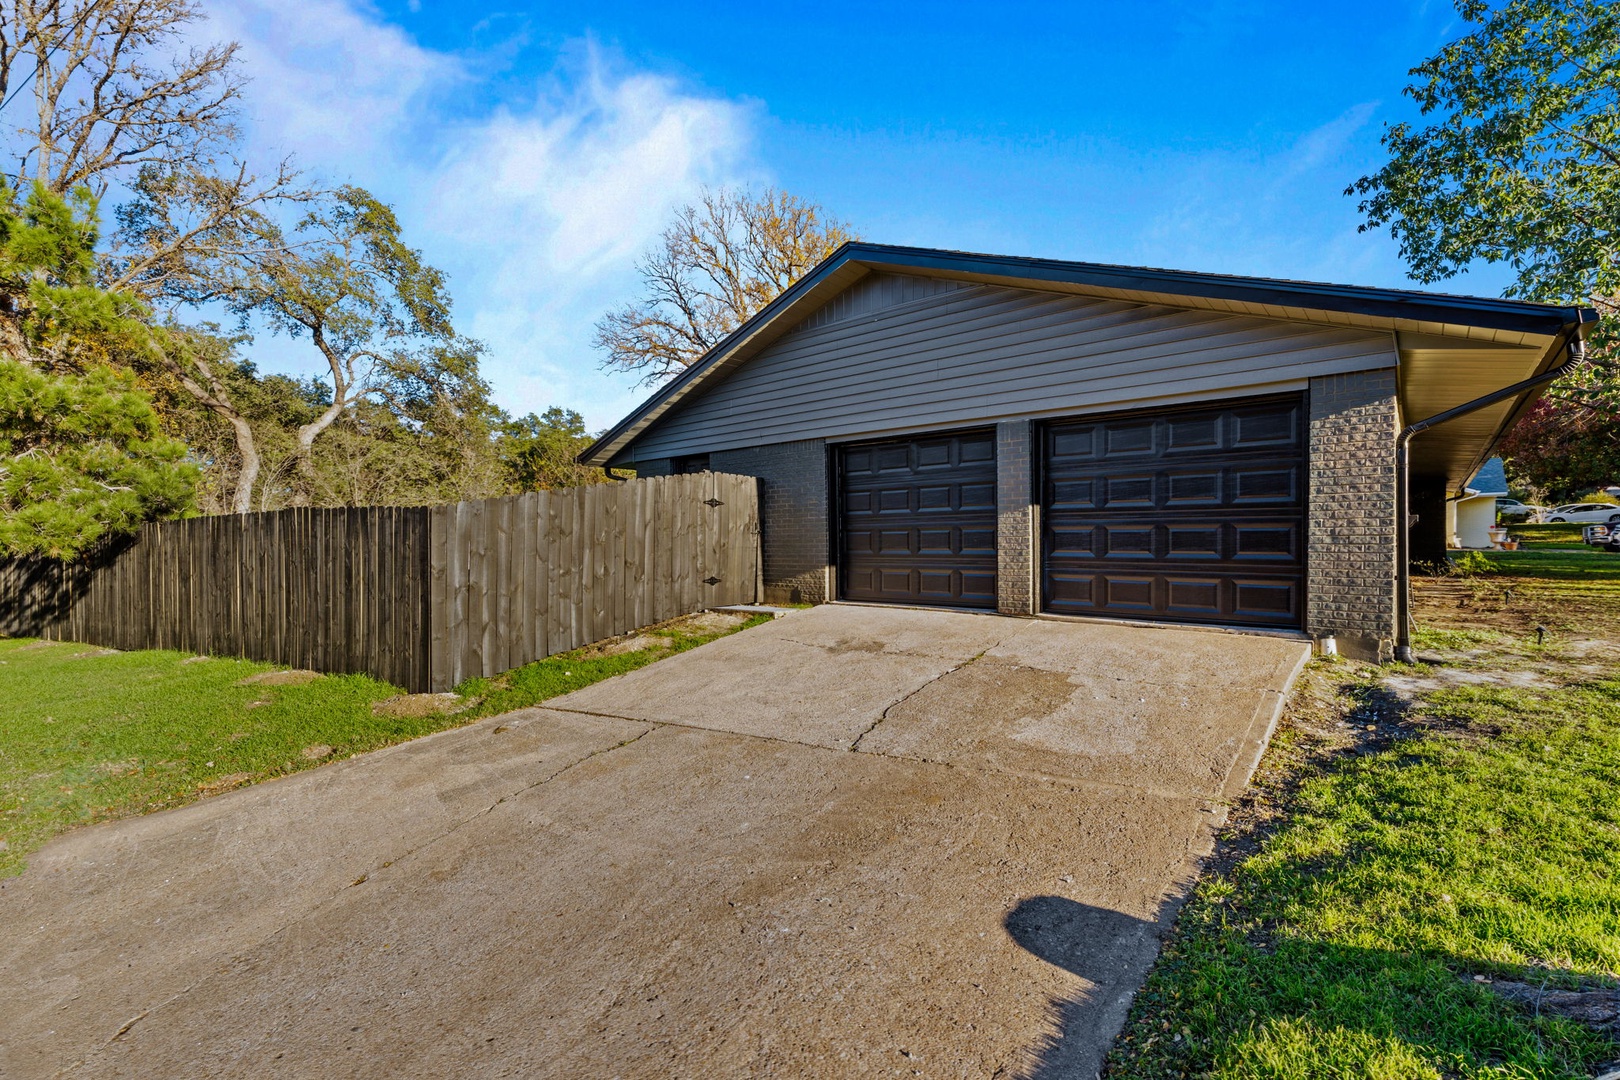 This home offers parking for up to 4 vehicles between the driveway & garage